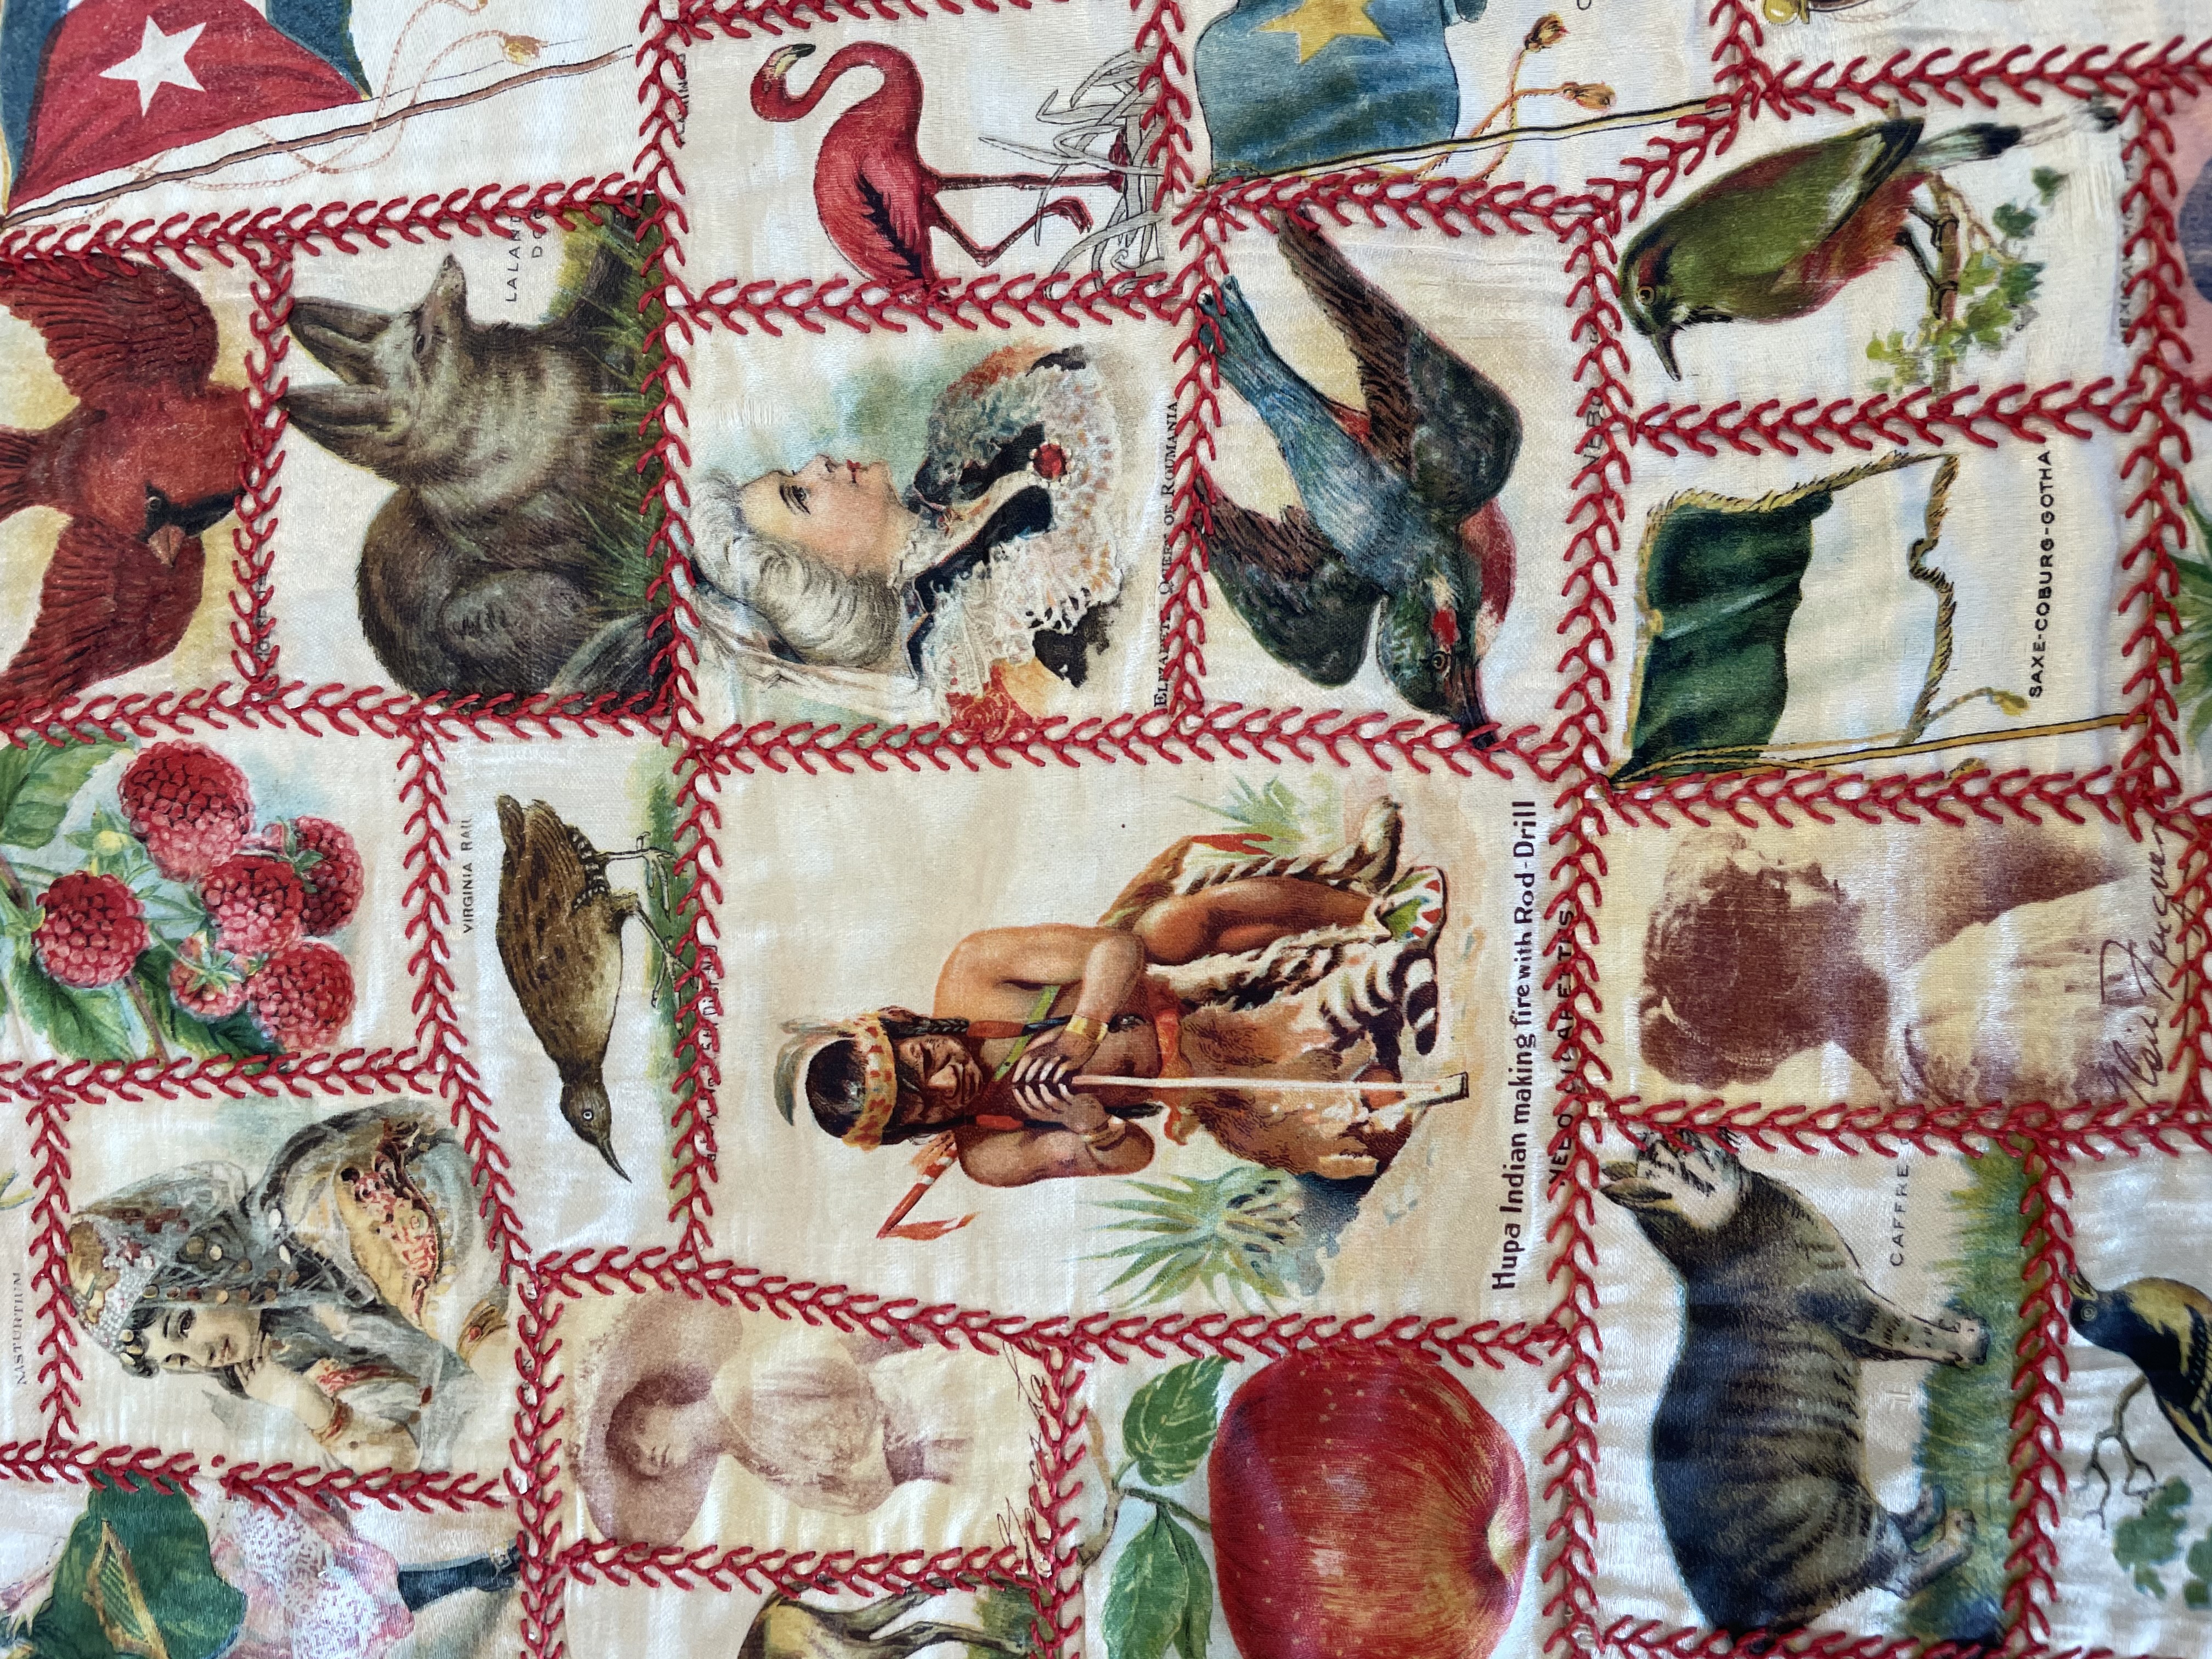 close up of section of quilt featuring "Hupa Indian"